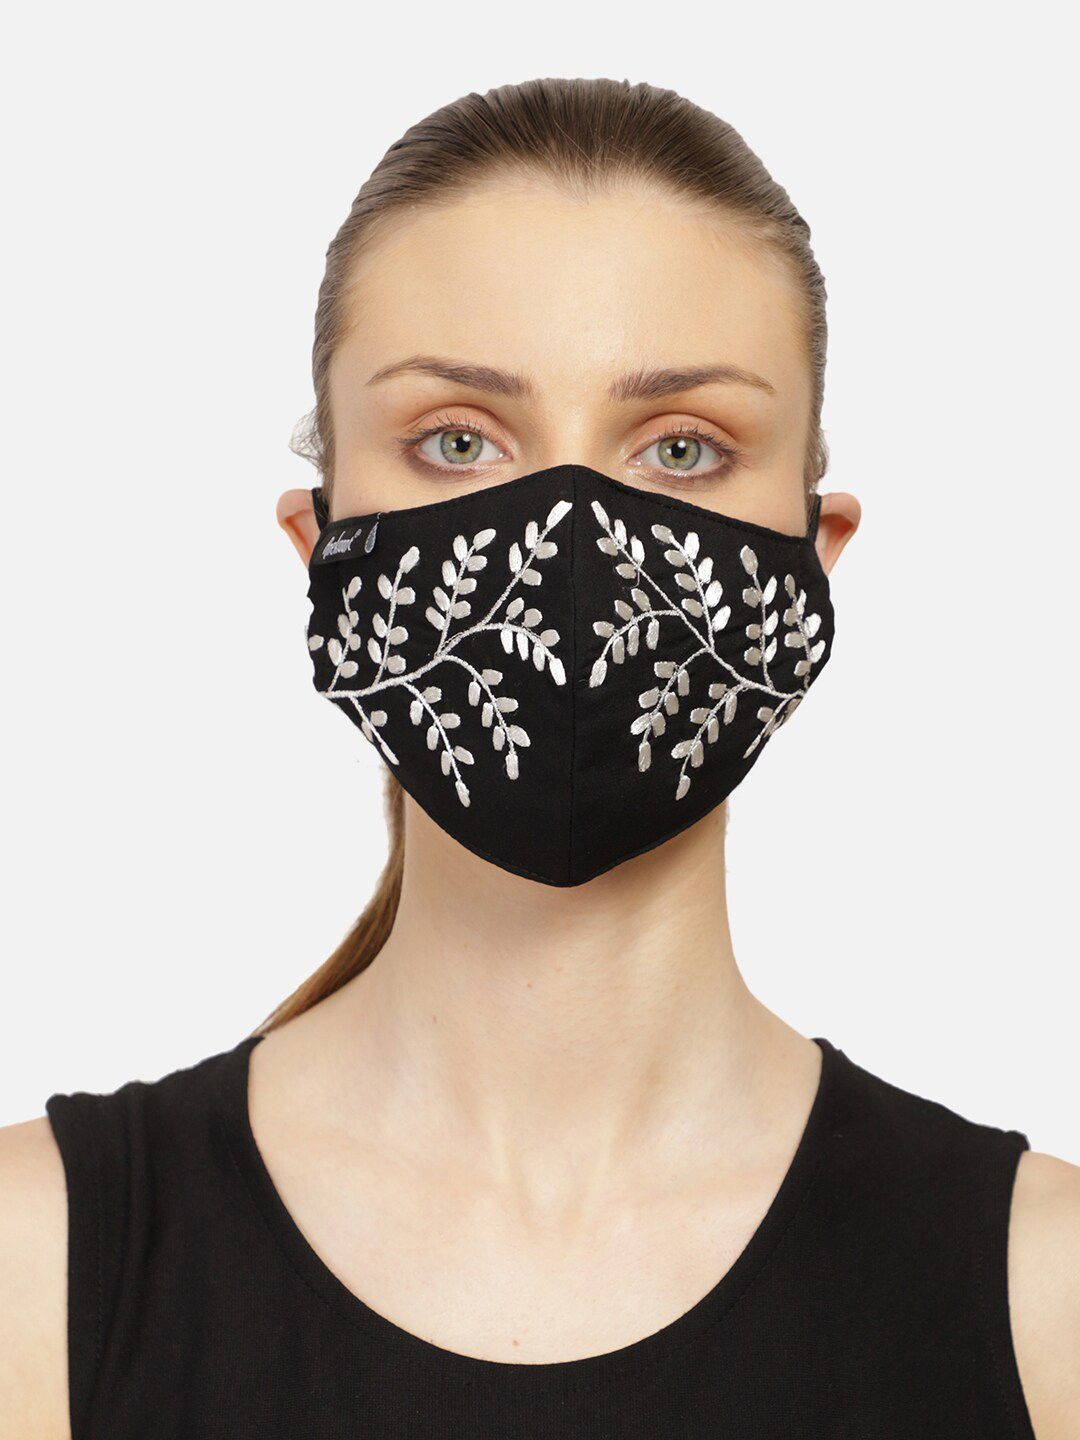 Anekaant Women 3Ply Protective Outdoor Face Masks Price in India